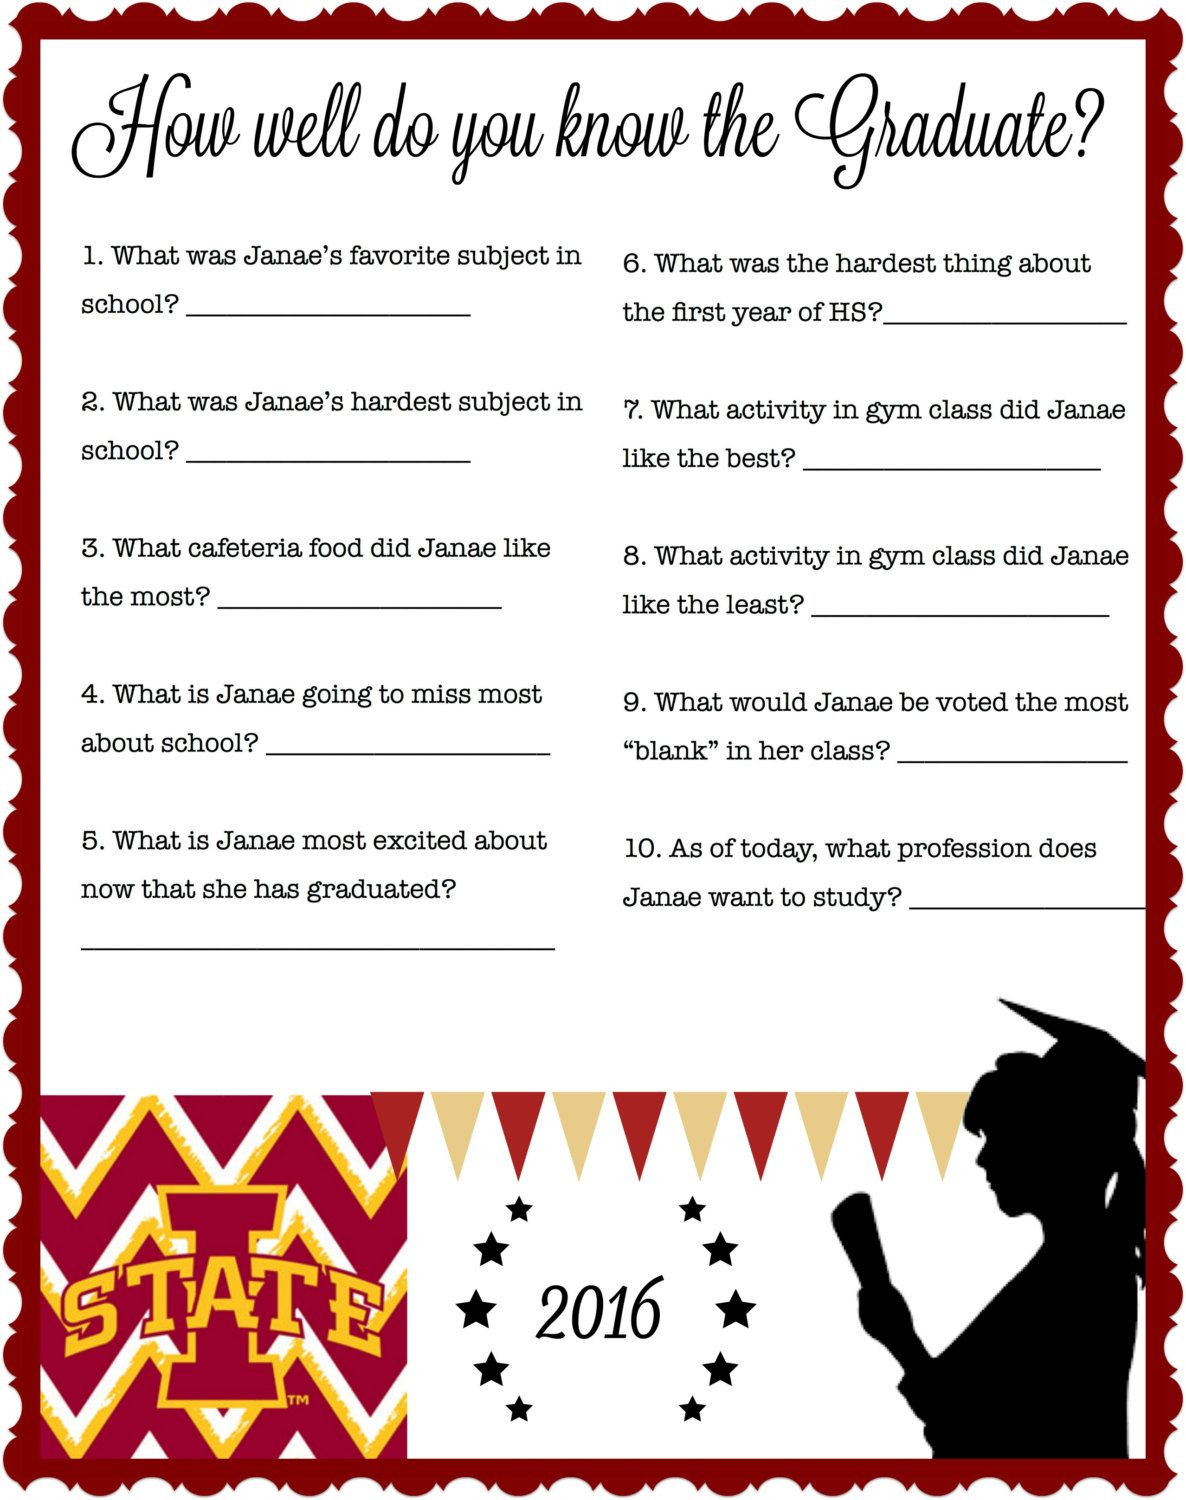 College Graduation Party Game Ideas
 College Graduation Party Game Who knows the graduate the